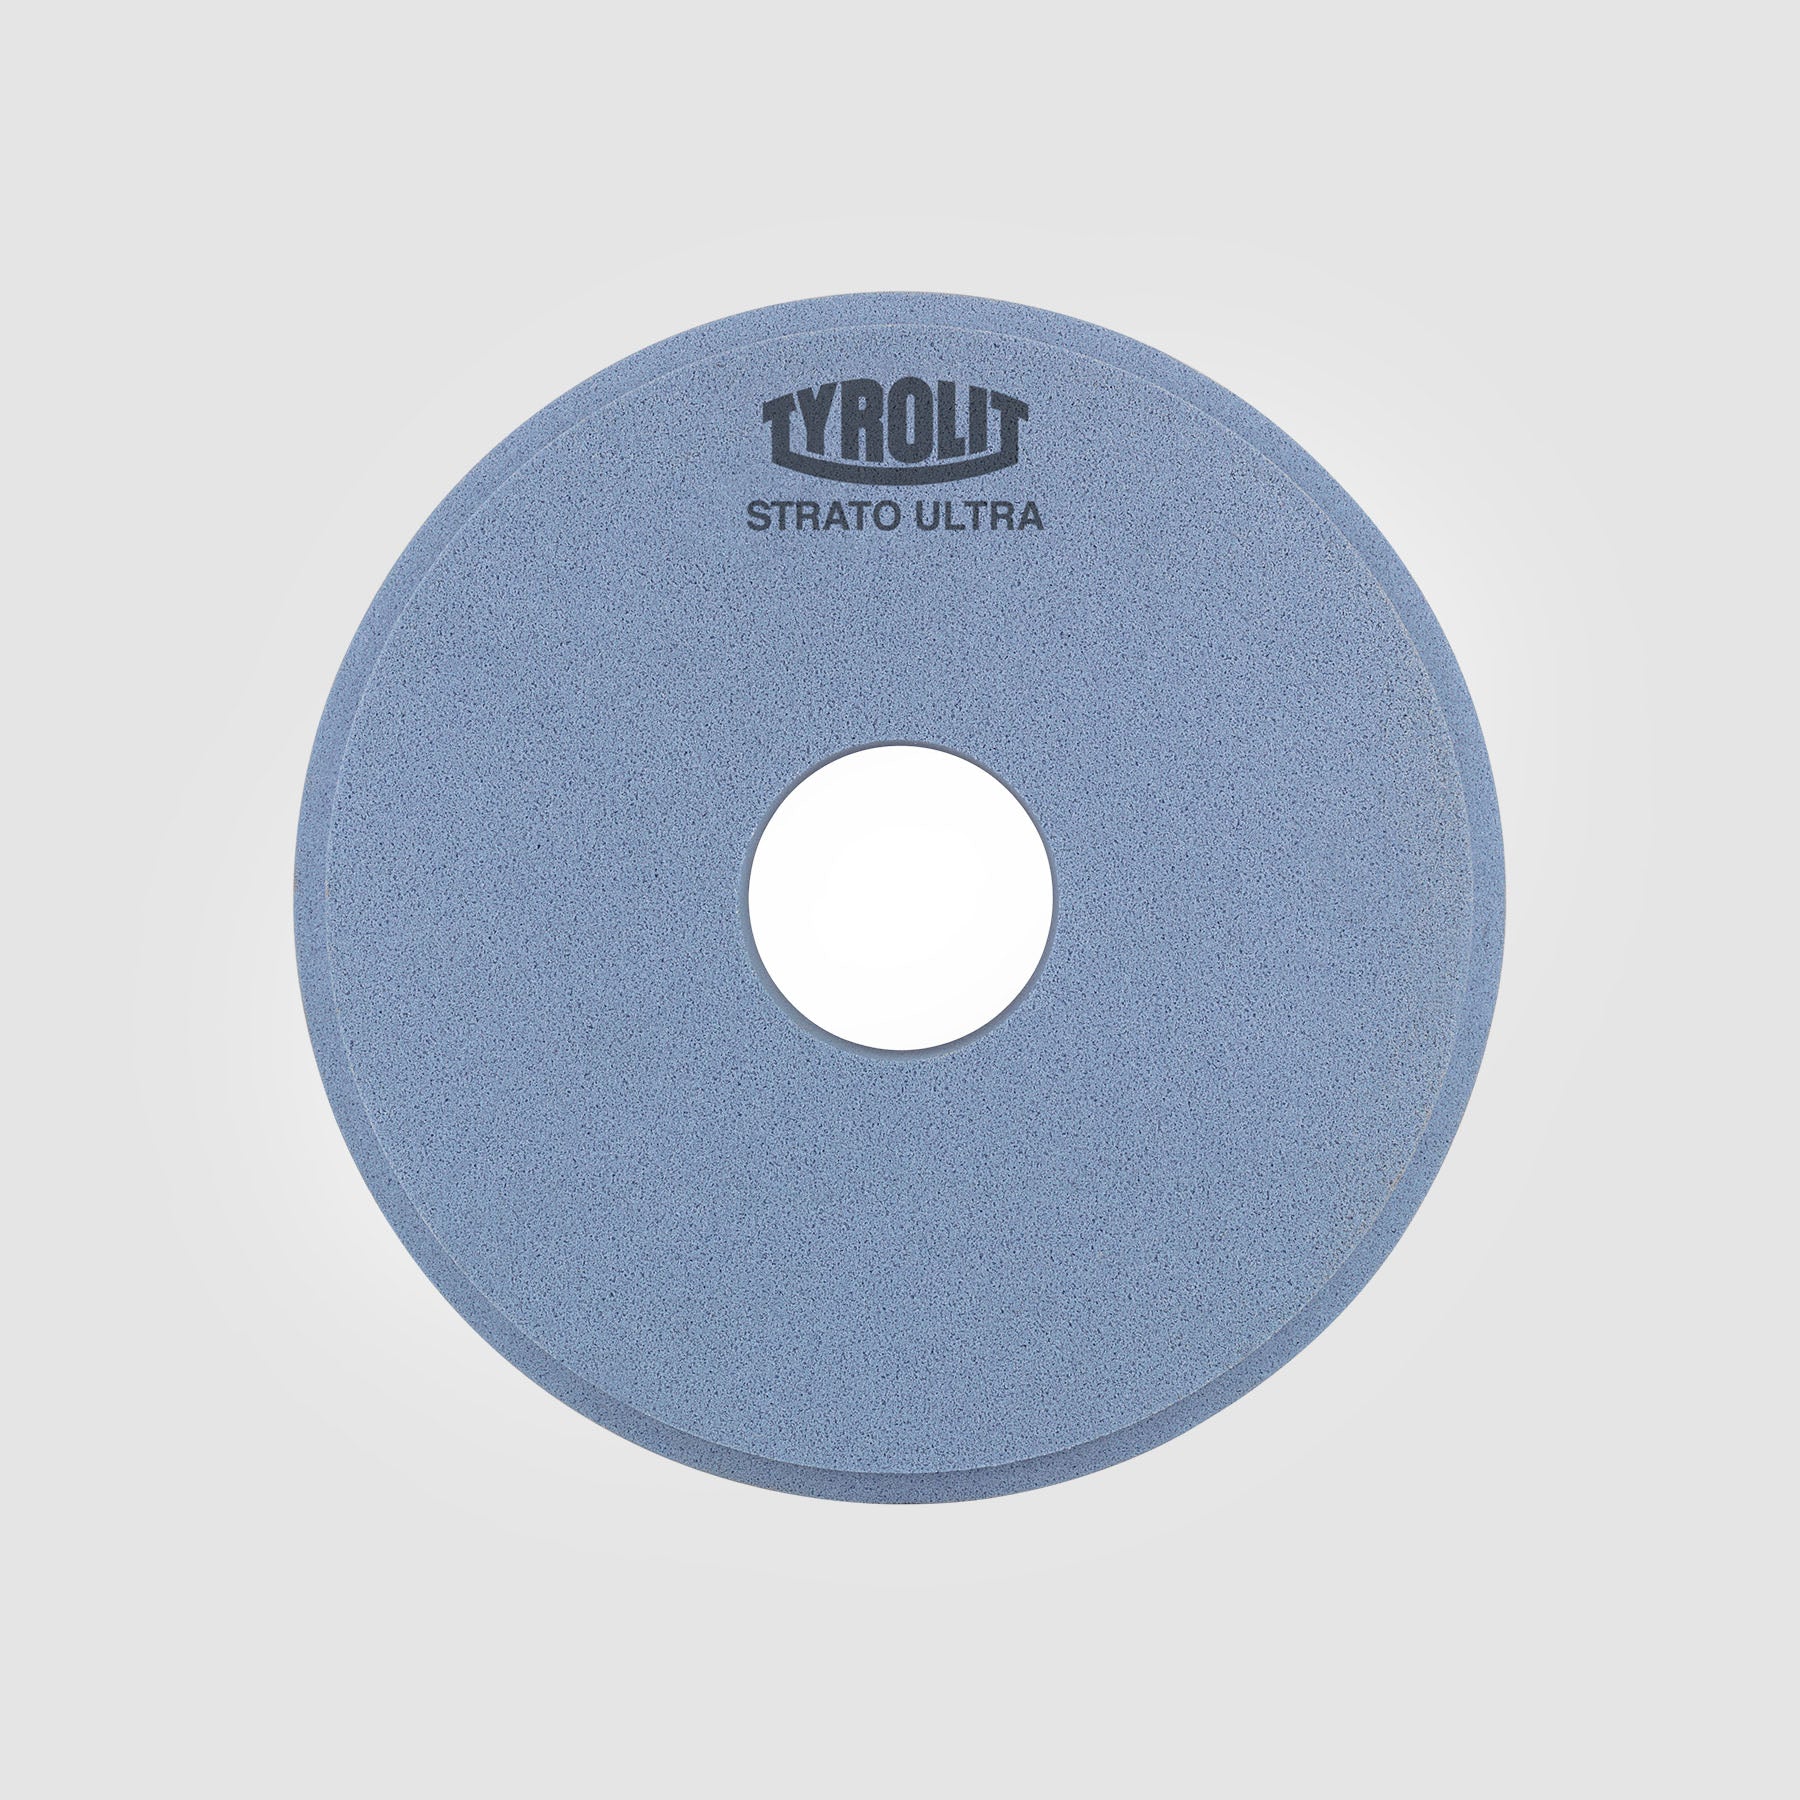 STRATO-ULTRA 16" X 3" X 5" | Grade FF | Grit 60 for Surface Grinding